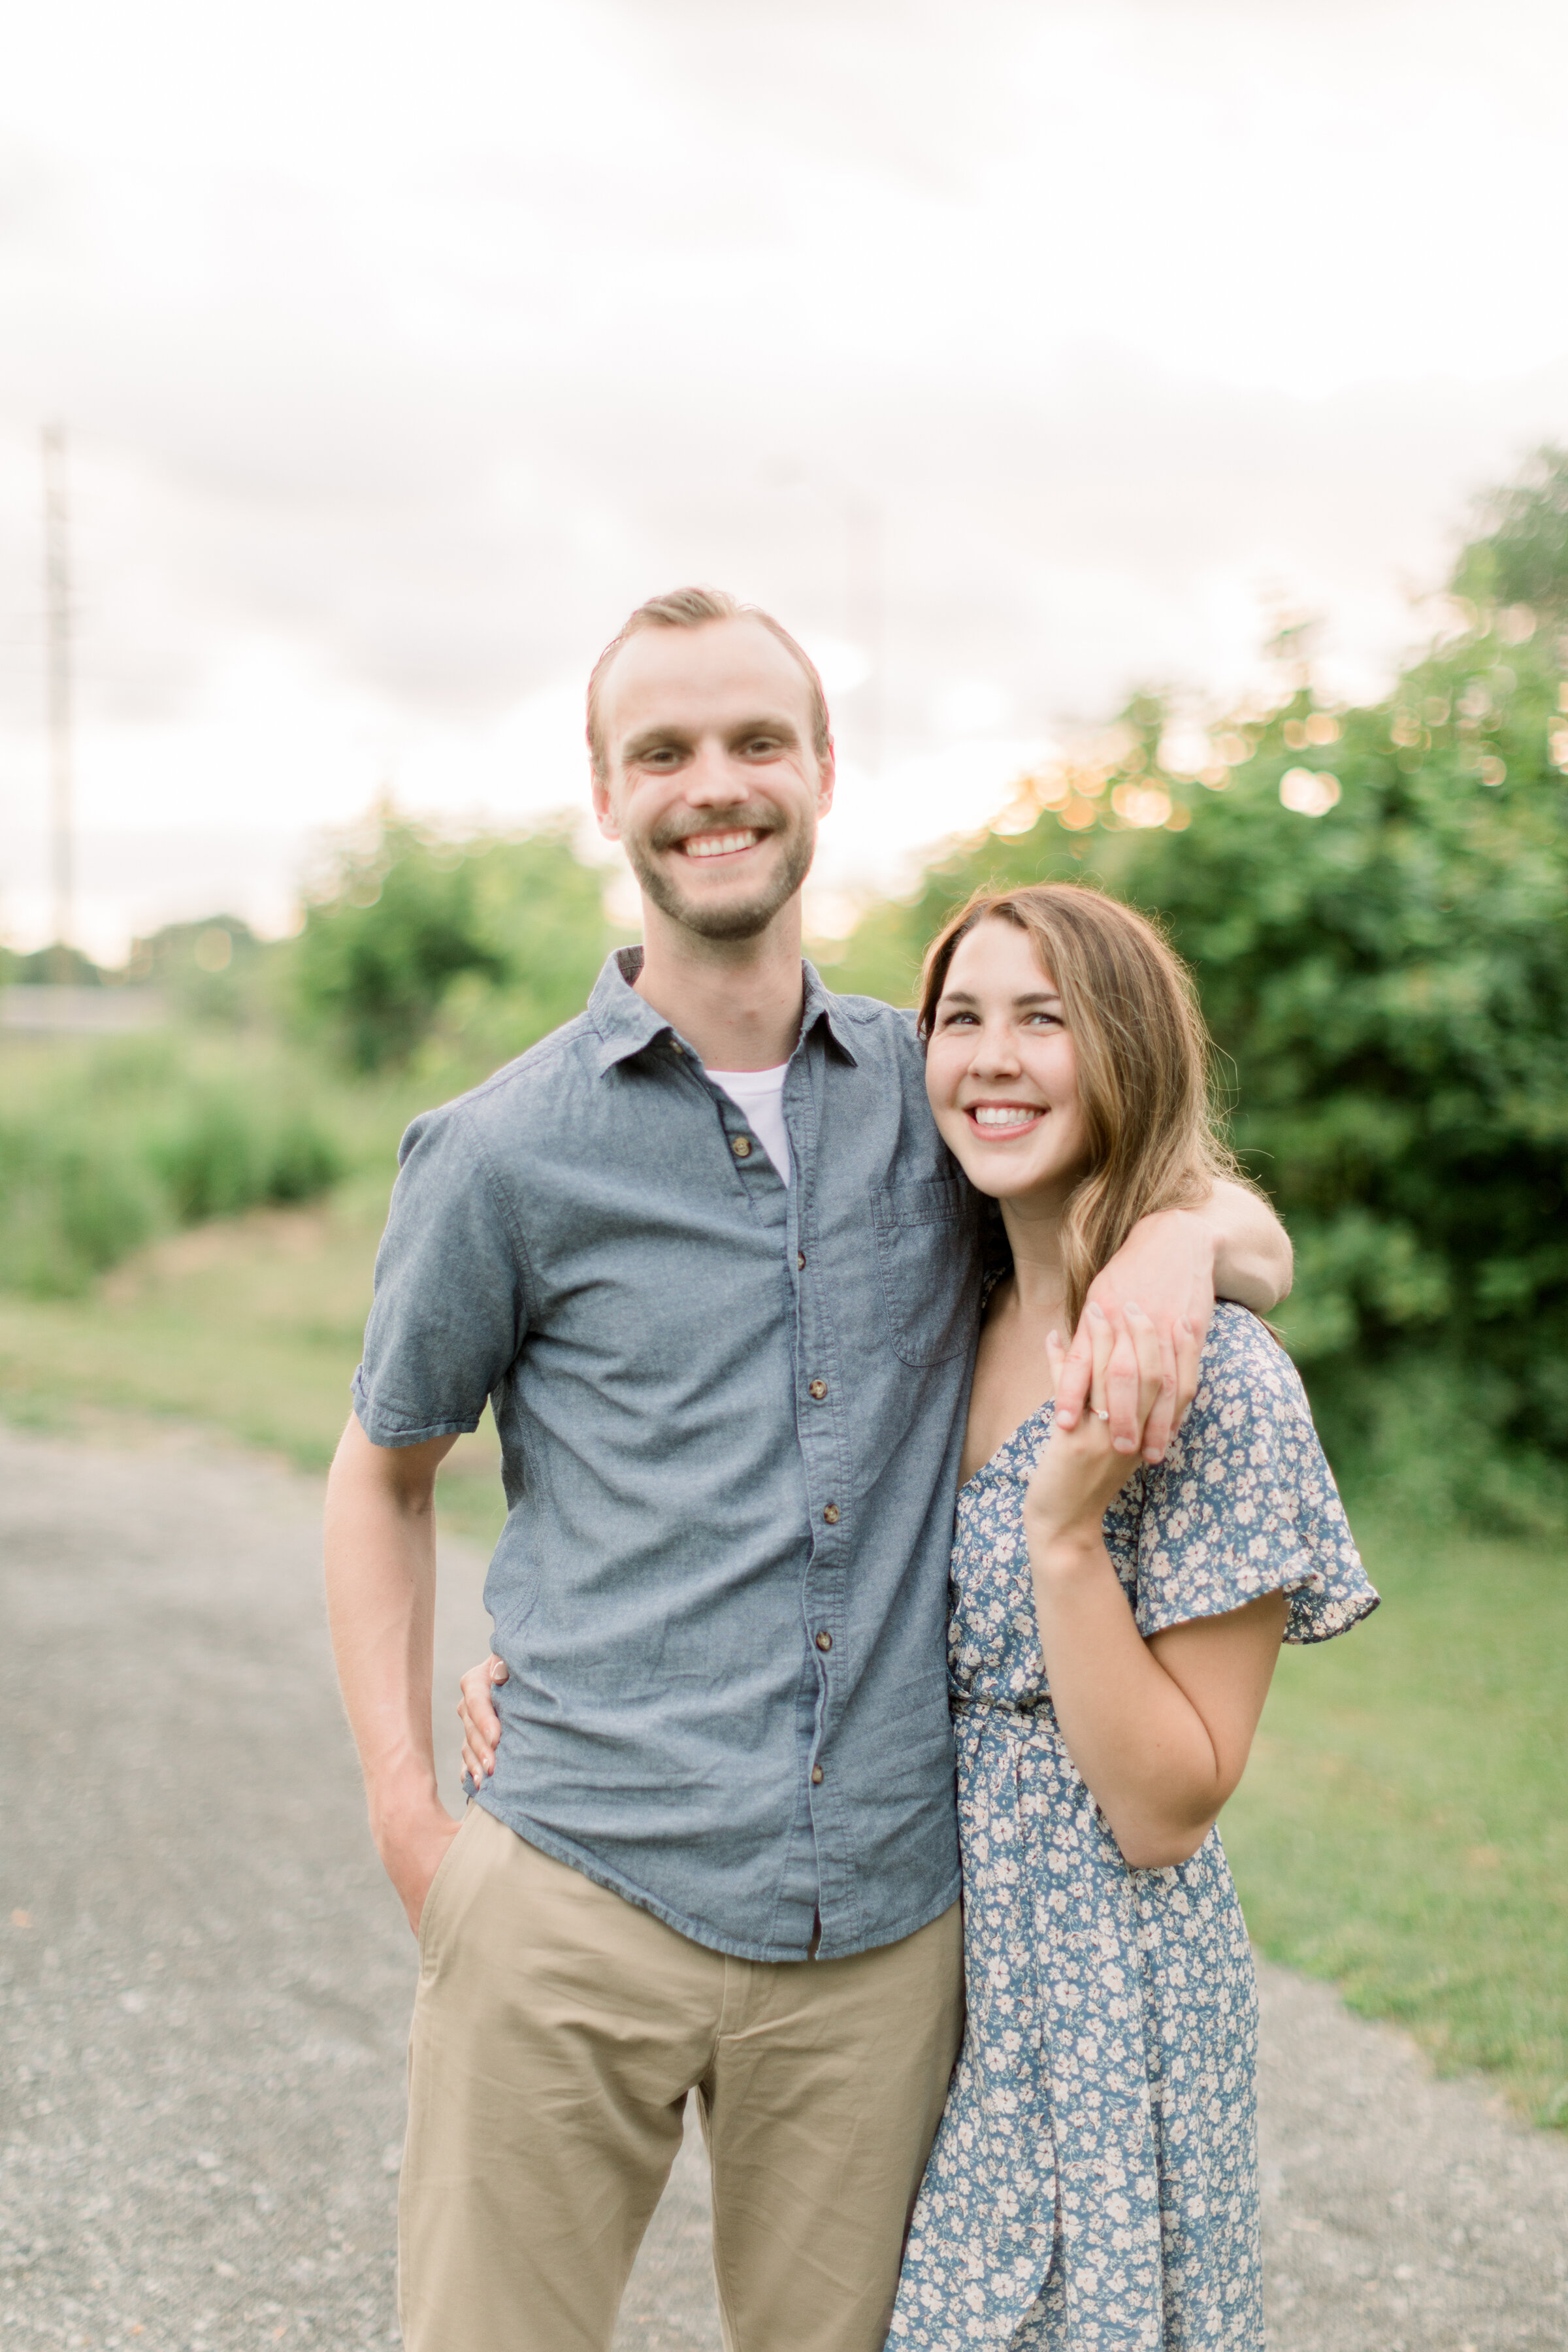  Couple posing for engagements in beautiful outdoor location with blue and white colors for outfit inspo by Chelsea Mason Photography in Ottawa, ON. outfit inspo for engagements summer colors for photoshoot couple outfits for pictures poses for engag